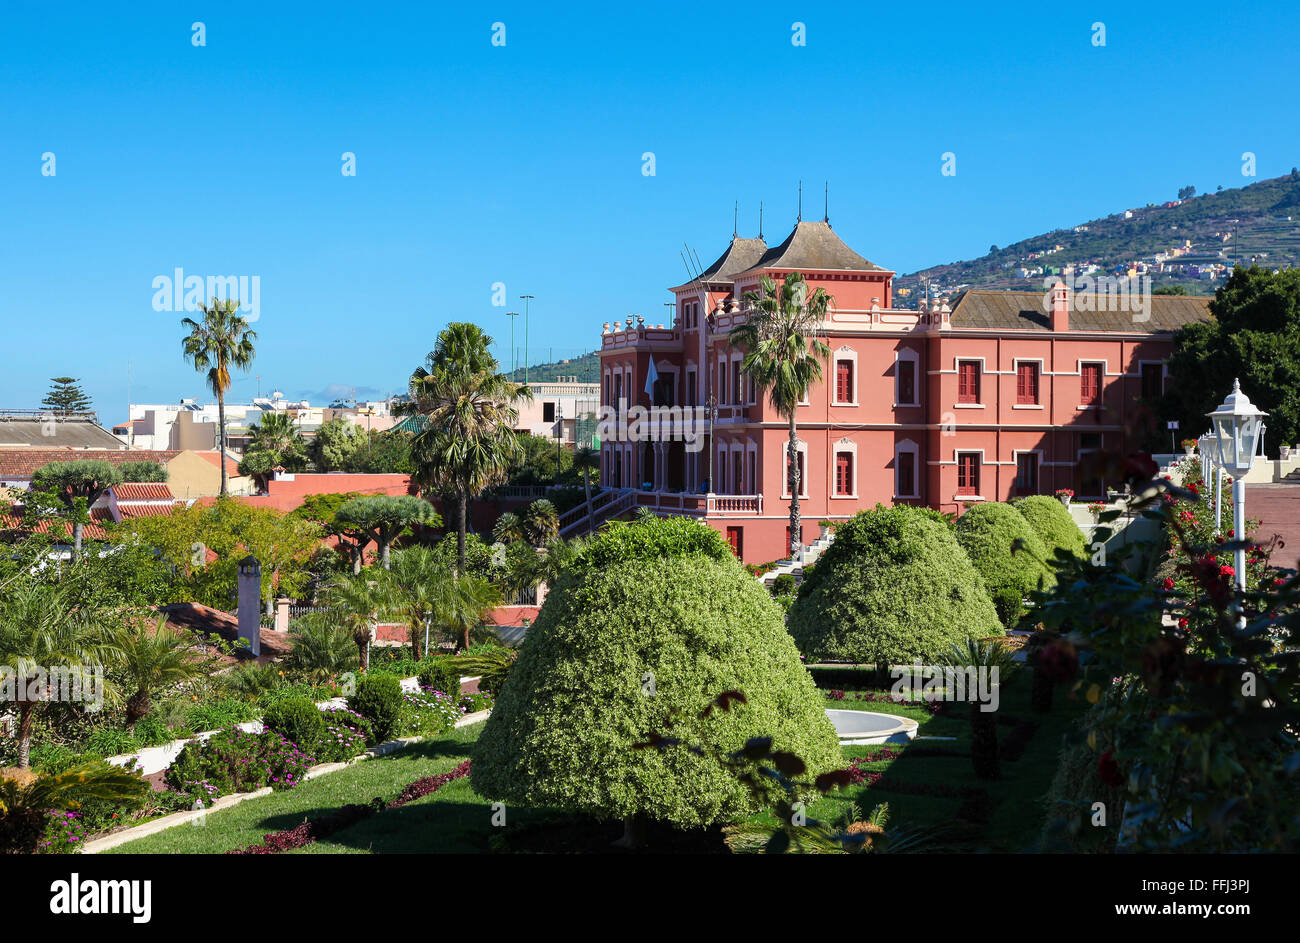 LA OROTAVA, SPAIN - JANUARY 22, 2016: Liceo de Taoro in La Orotava, a town in the northern part of Tenerife, one of the Canary I Stock Photo